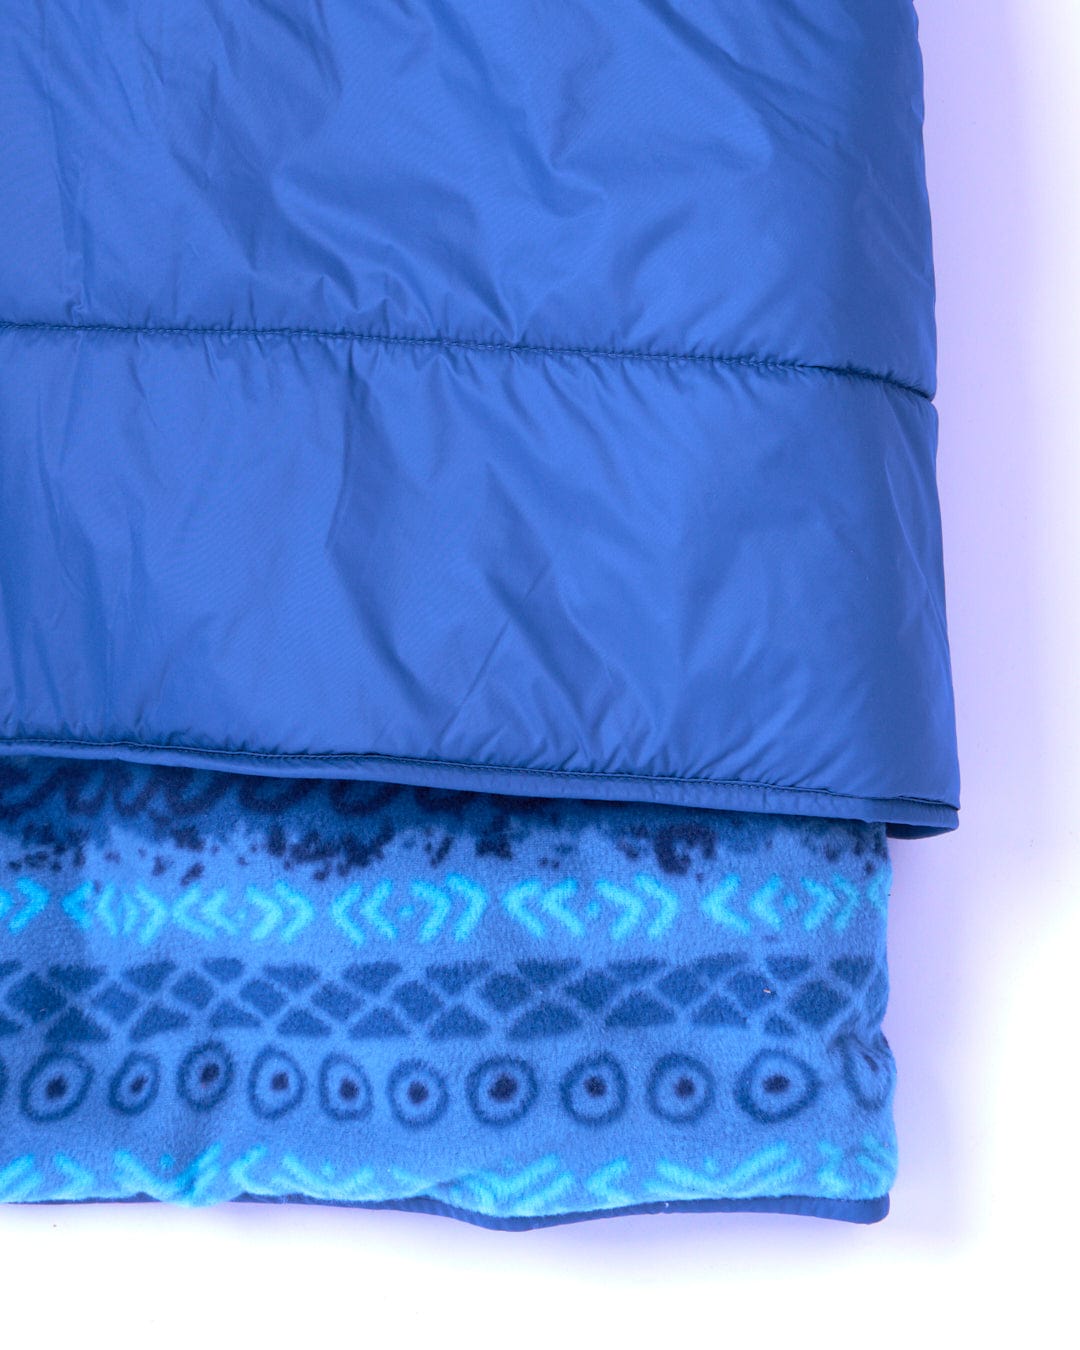 A water-resistant Saltrock Marks - Unisex Recycled Reversible Poncho - Blue blanket made from recycled material on a white surface.